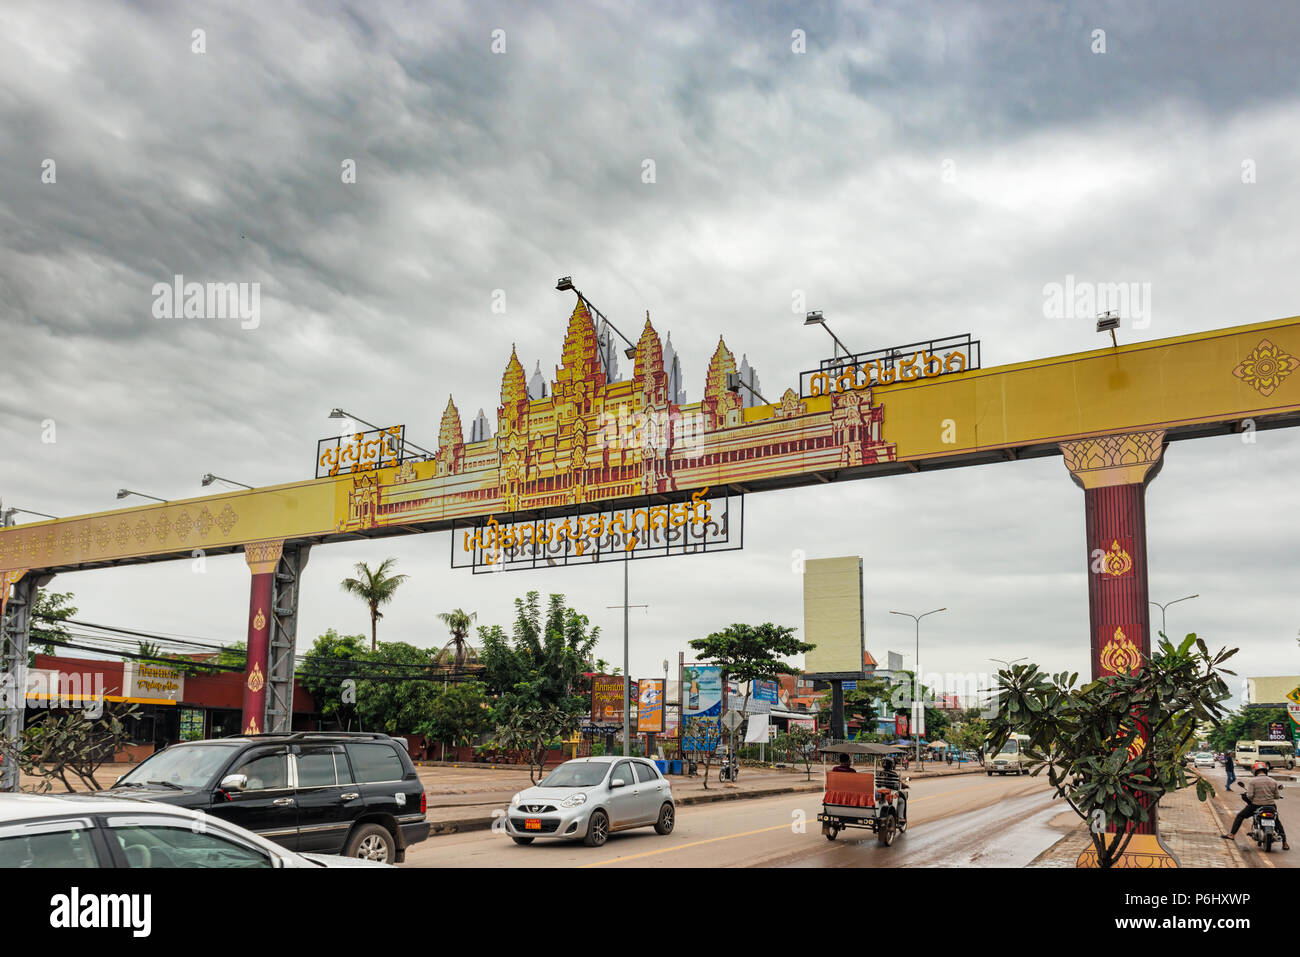 Siem Reap, Cambodia - November 19, 2017:  Angkor Wat picture hanging over one of the main roads in Siem Reap, Cambodia Stock Photo